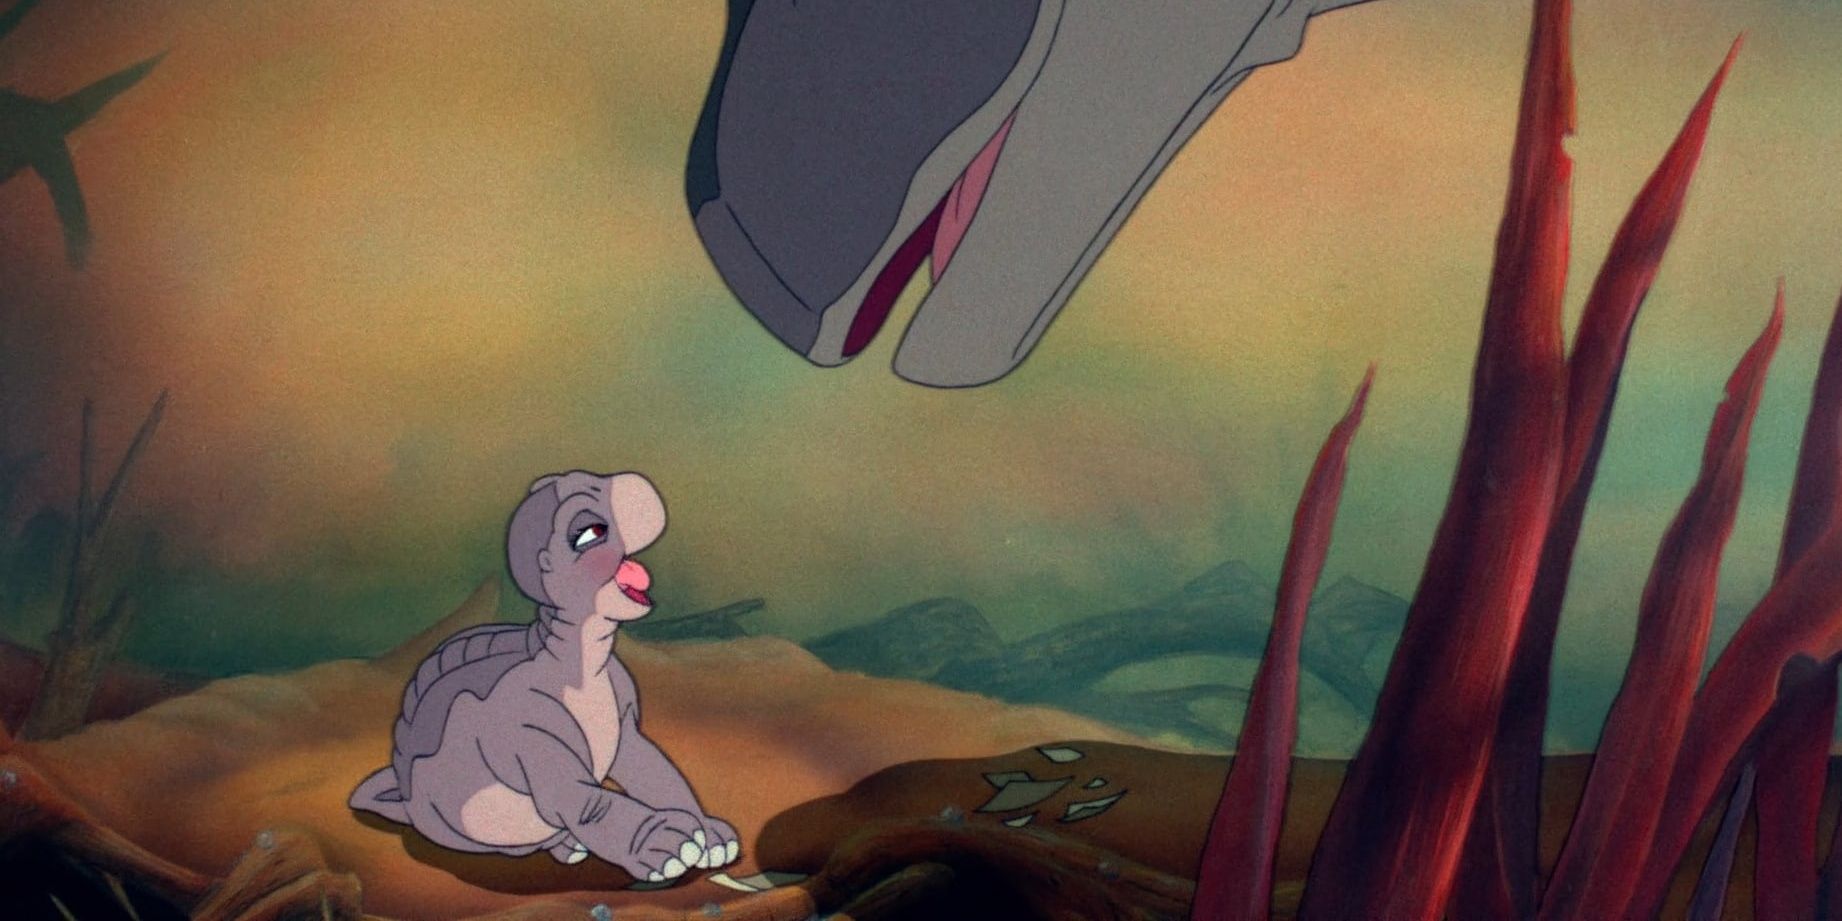 Littlefoot's mother smiling and Littlefoot in The Land Before Time